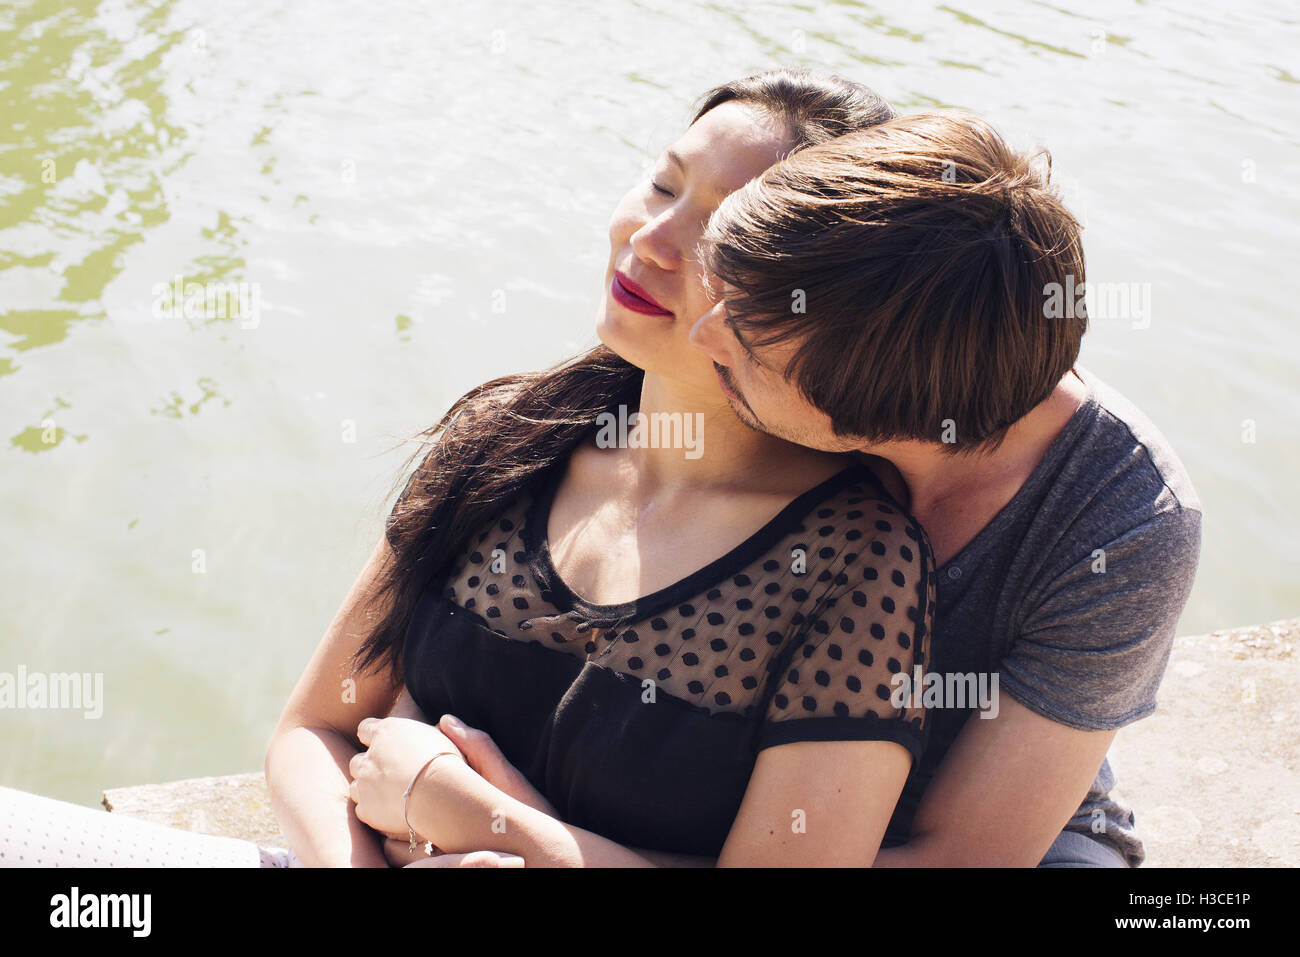 Couple relaxing together outdoors Stock Photo